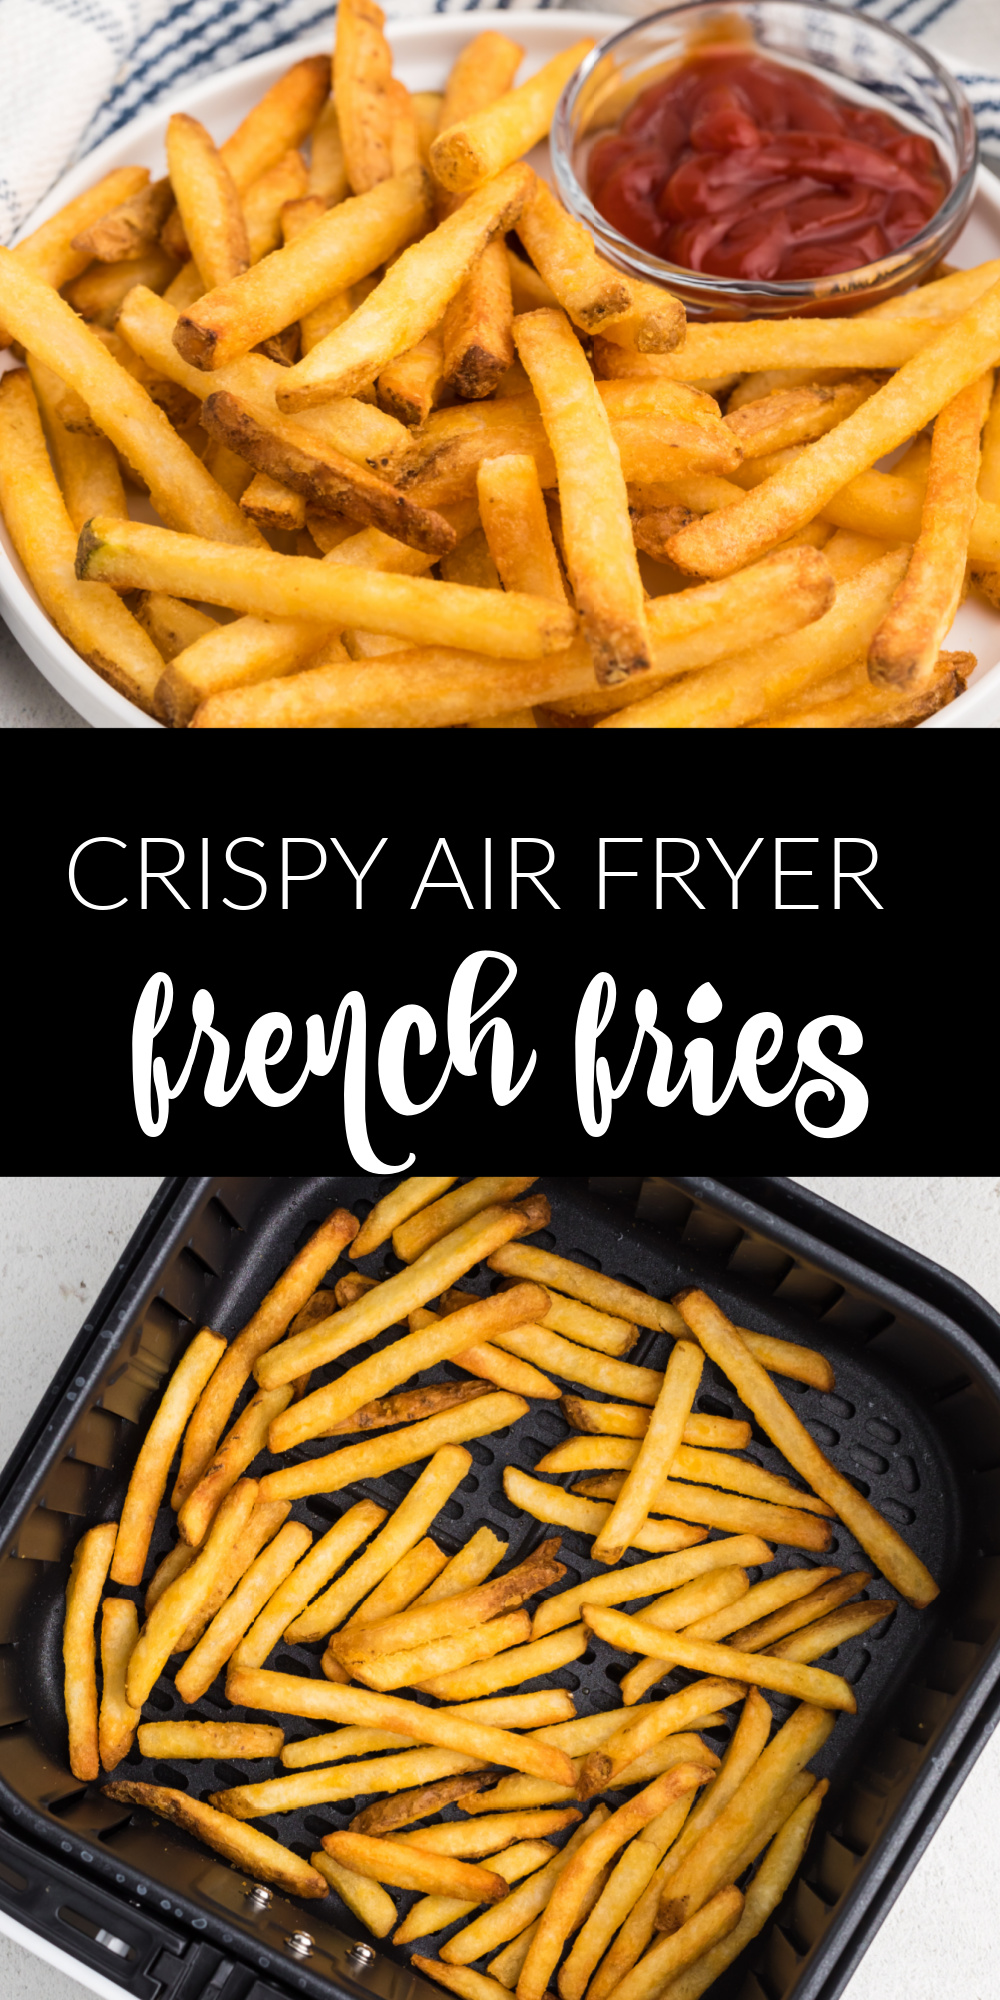 These perfectly crisp air fryer frozen fries are better than fast food! And you can prepare them fastest than you could even get to a restaurant to pick them up to-go. These frozen french fries, which have been crisped to wonderful perfection with the right amount of salt, will satisfy your cravings for fast-food-style fries without having to leave your house.